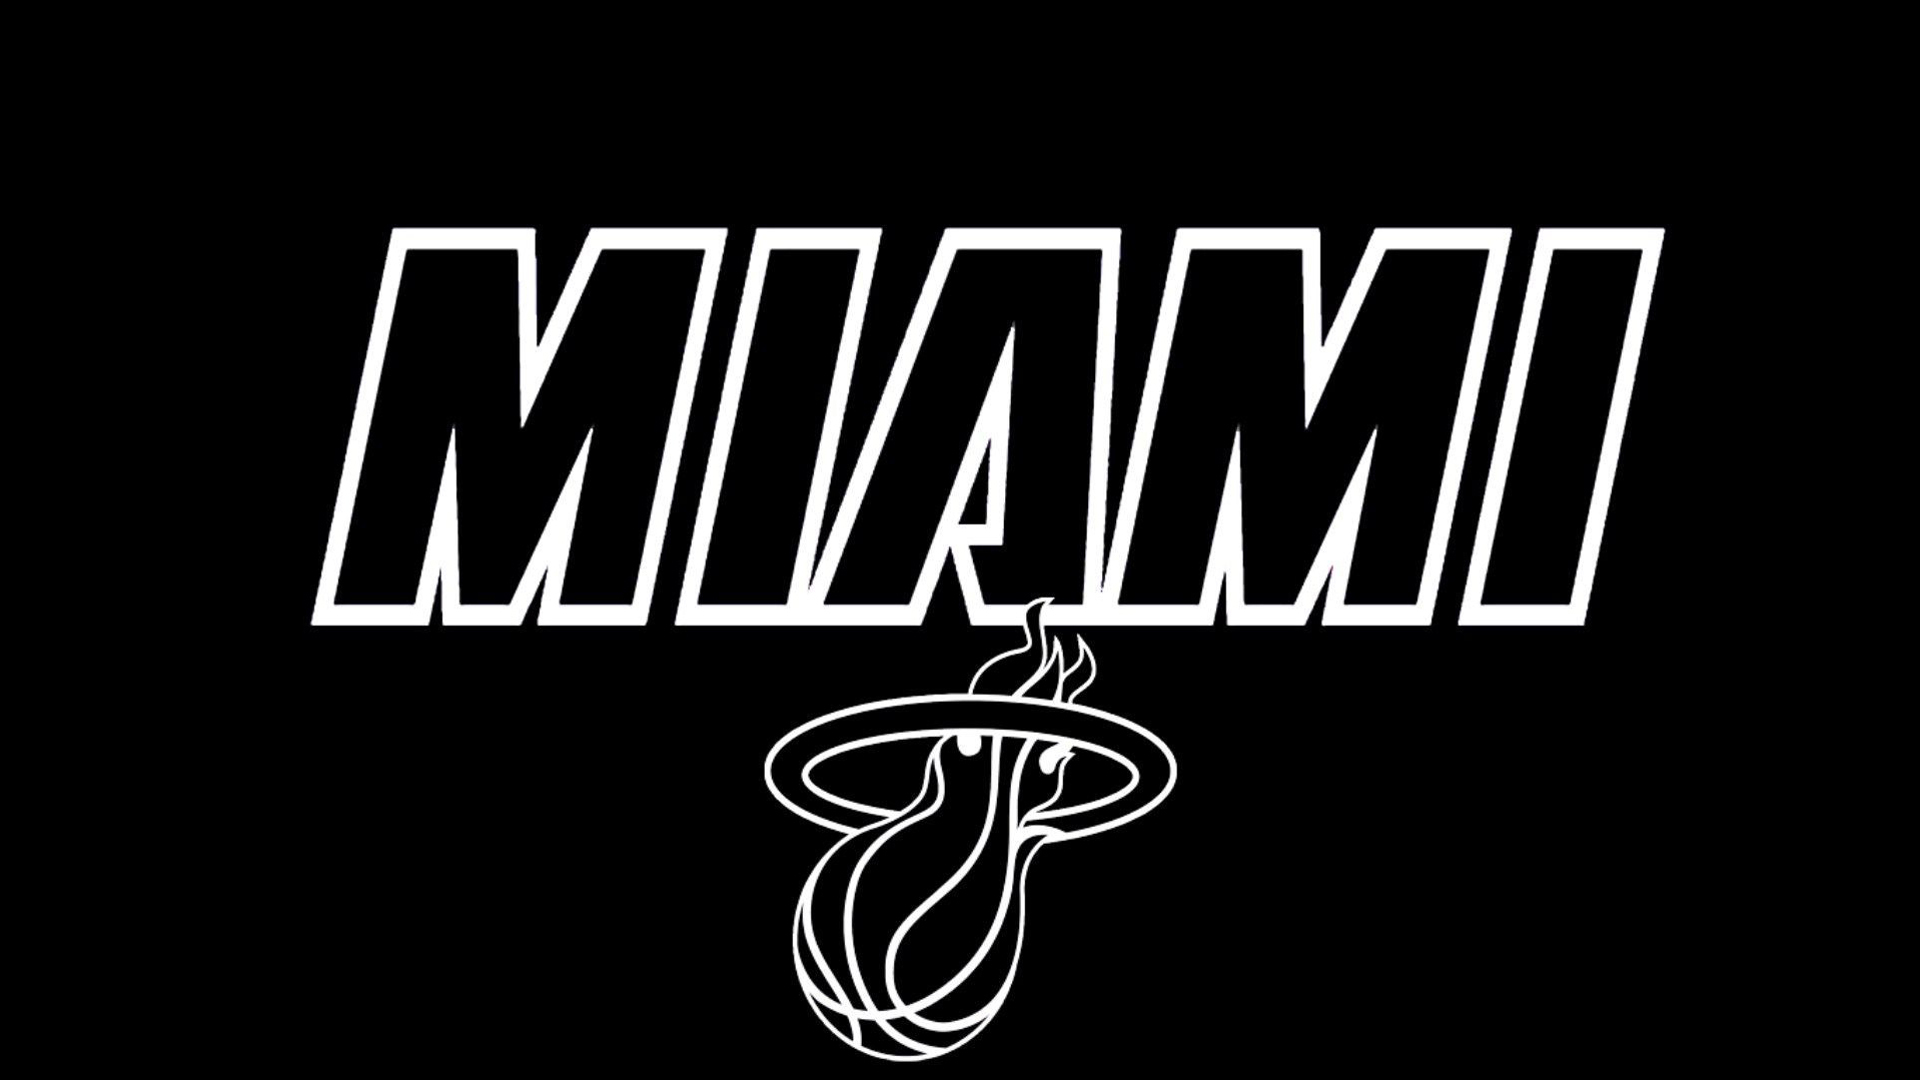 Miami Heat Wallpaper Image Photos Pictures Background